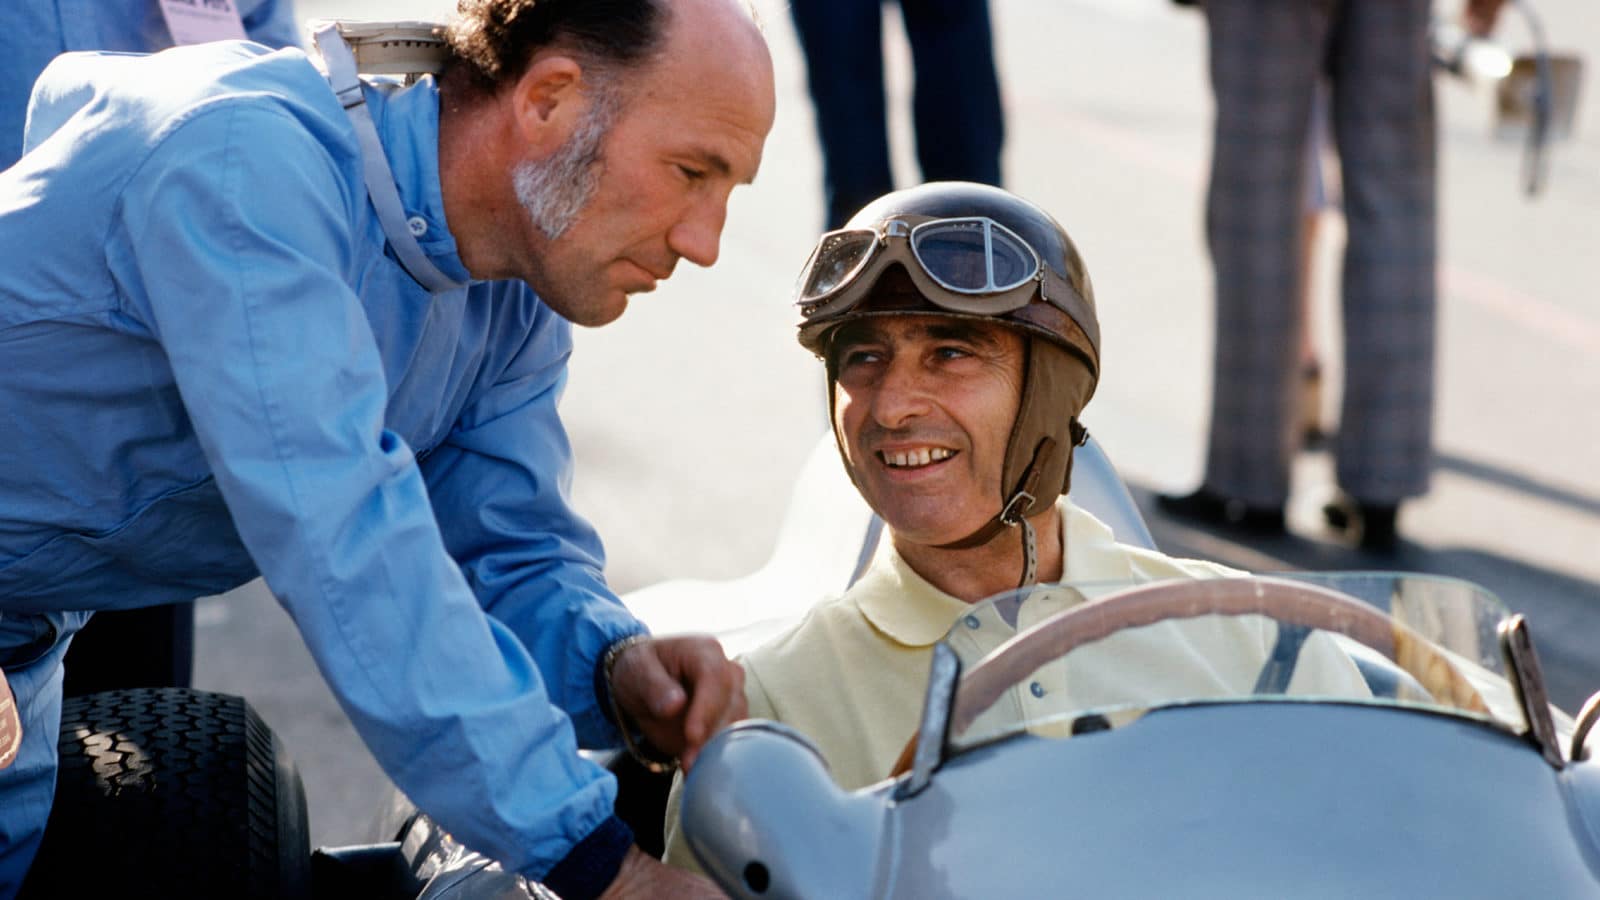 Stirling Moss leans into the Mercedes of Juan Manuel Fangio at 1976 Long Beach Historic race